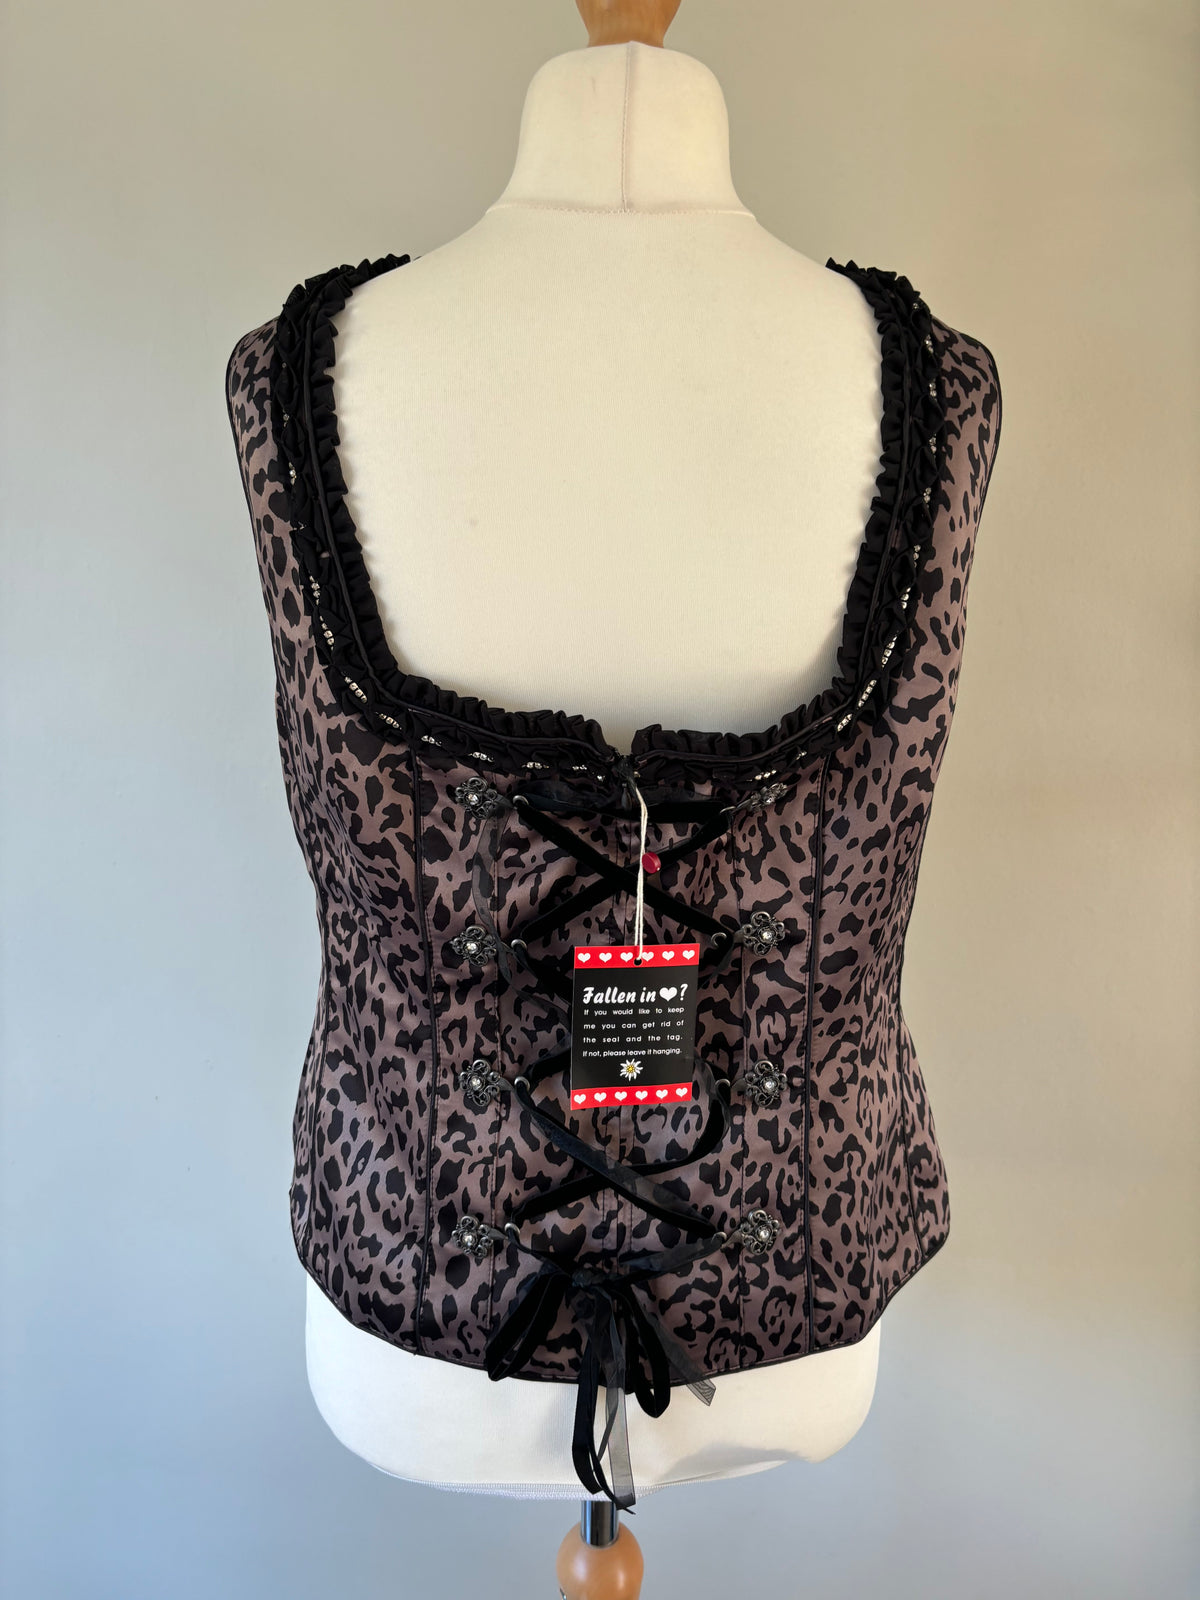 Stunning Printed Basque Top By BONPRIX Size 18